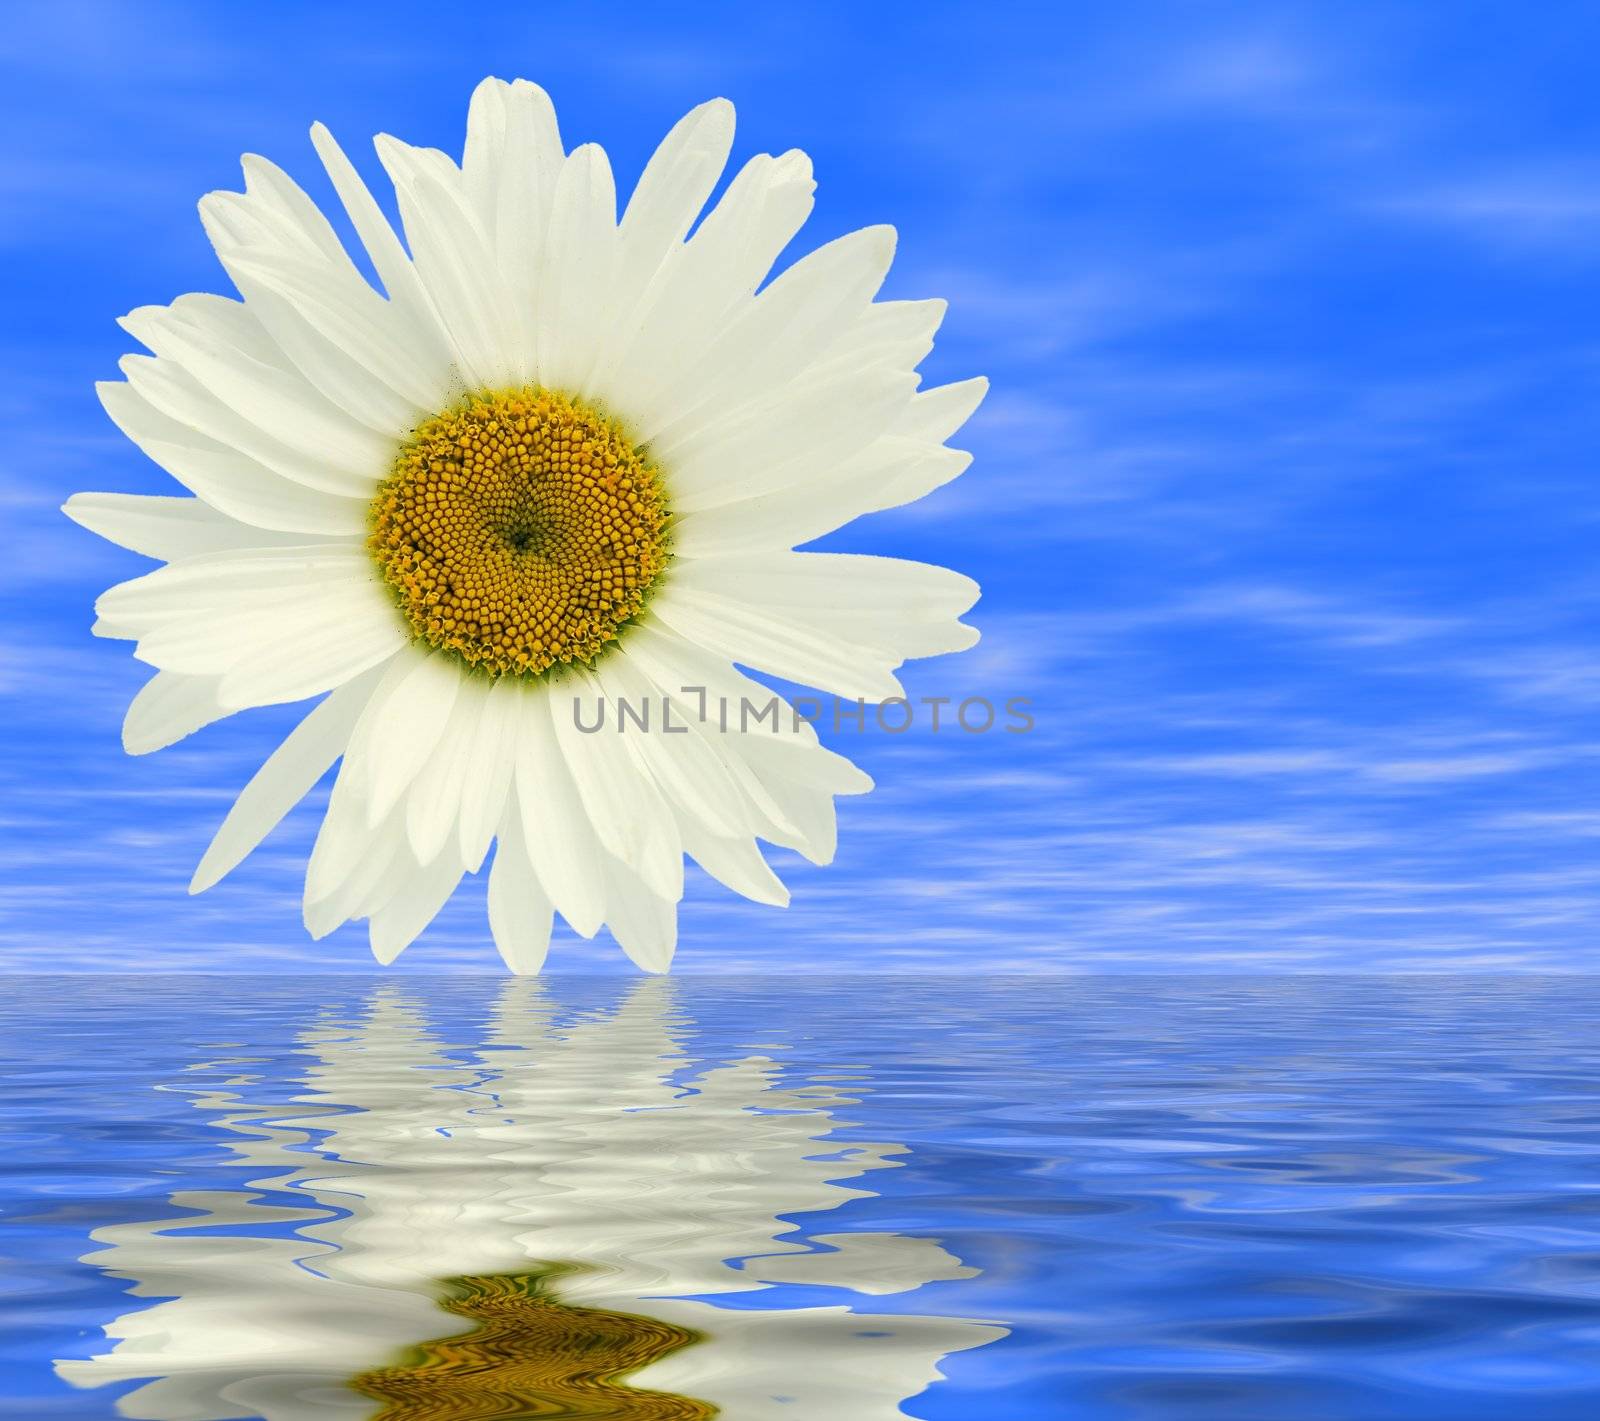 Flower of a camomile on a background of the sky with reflection in water